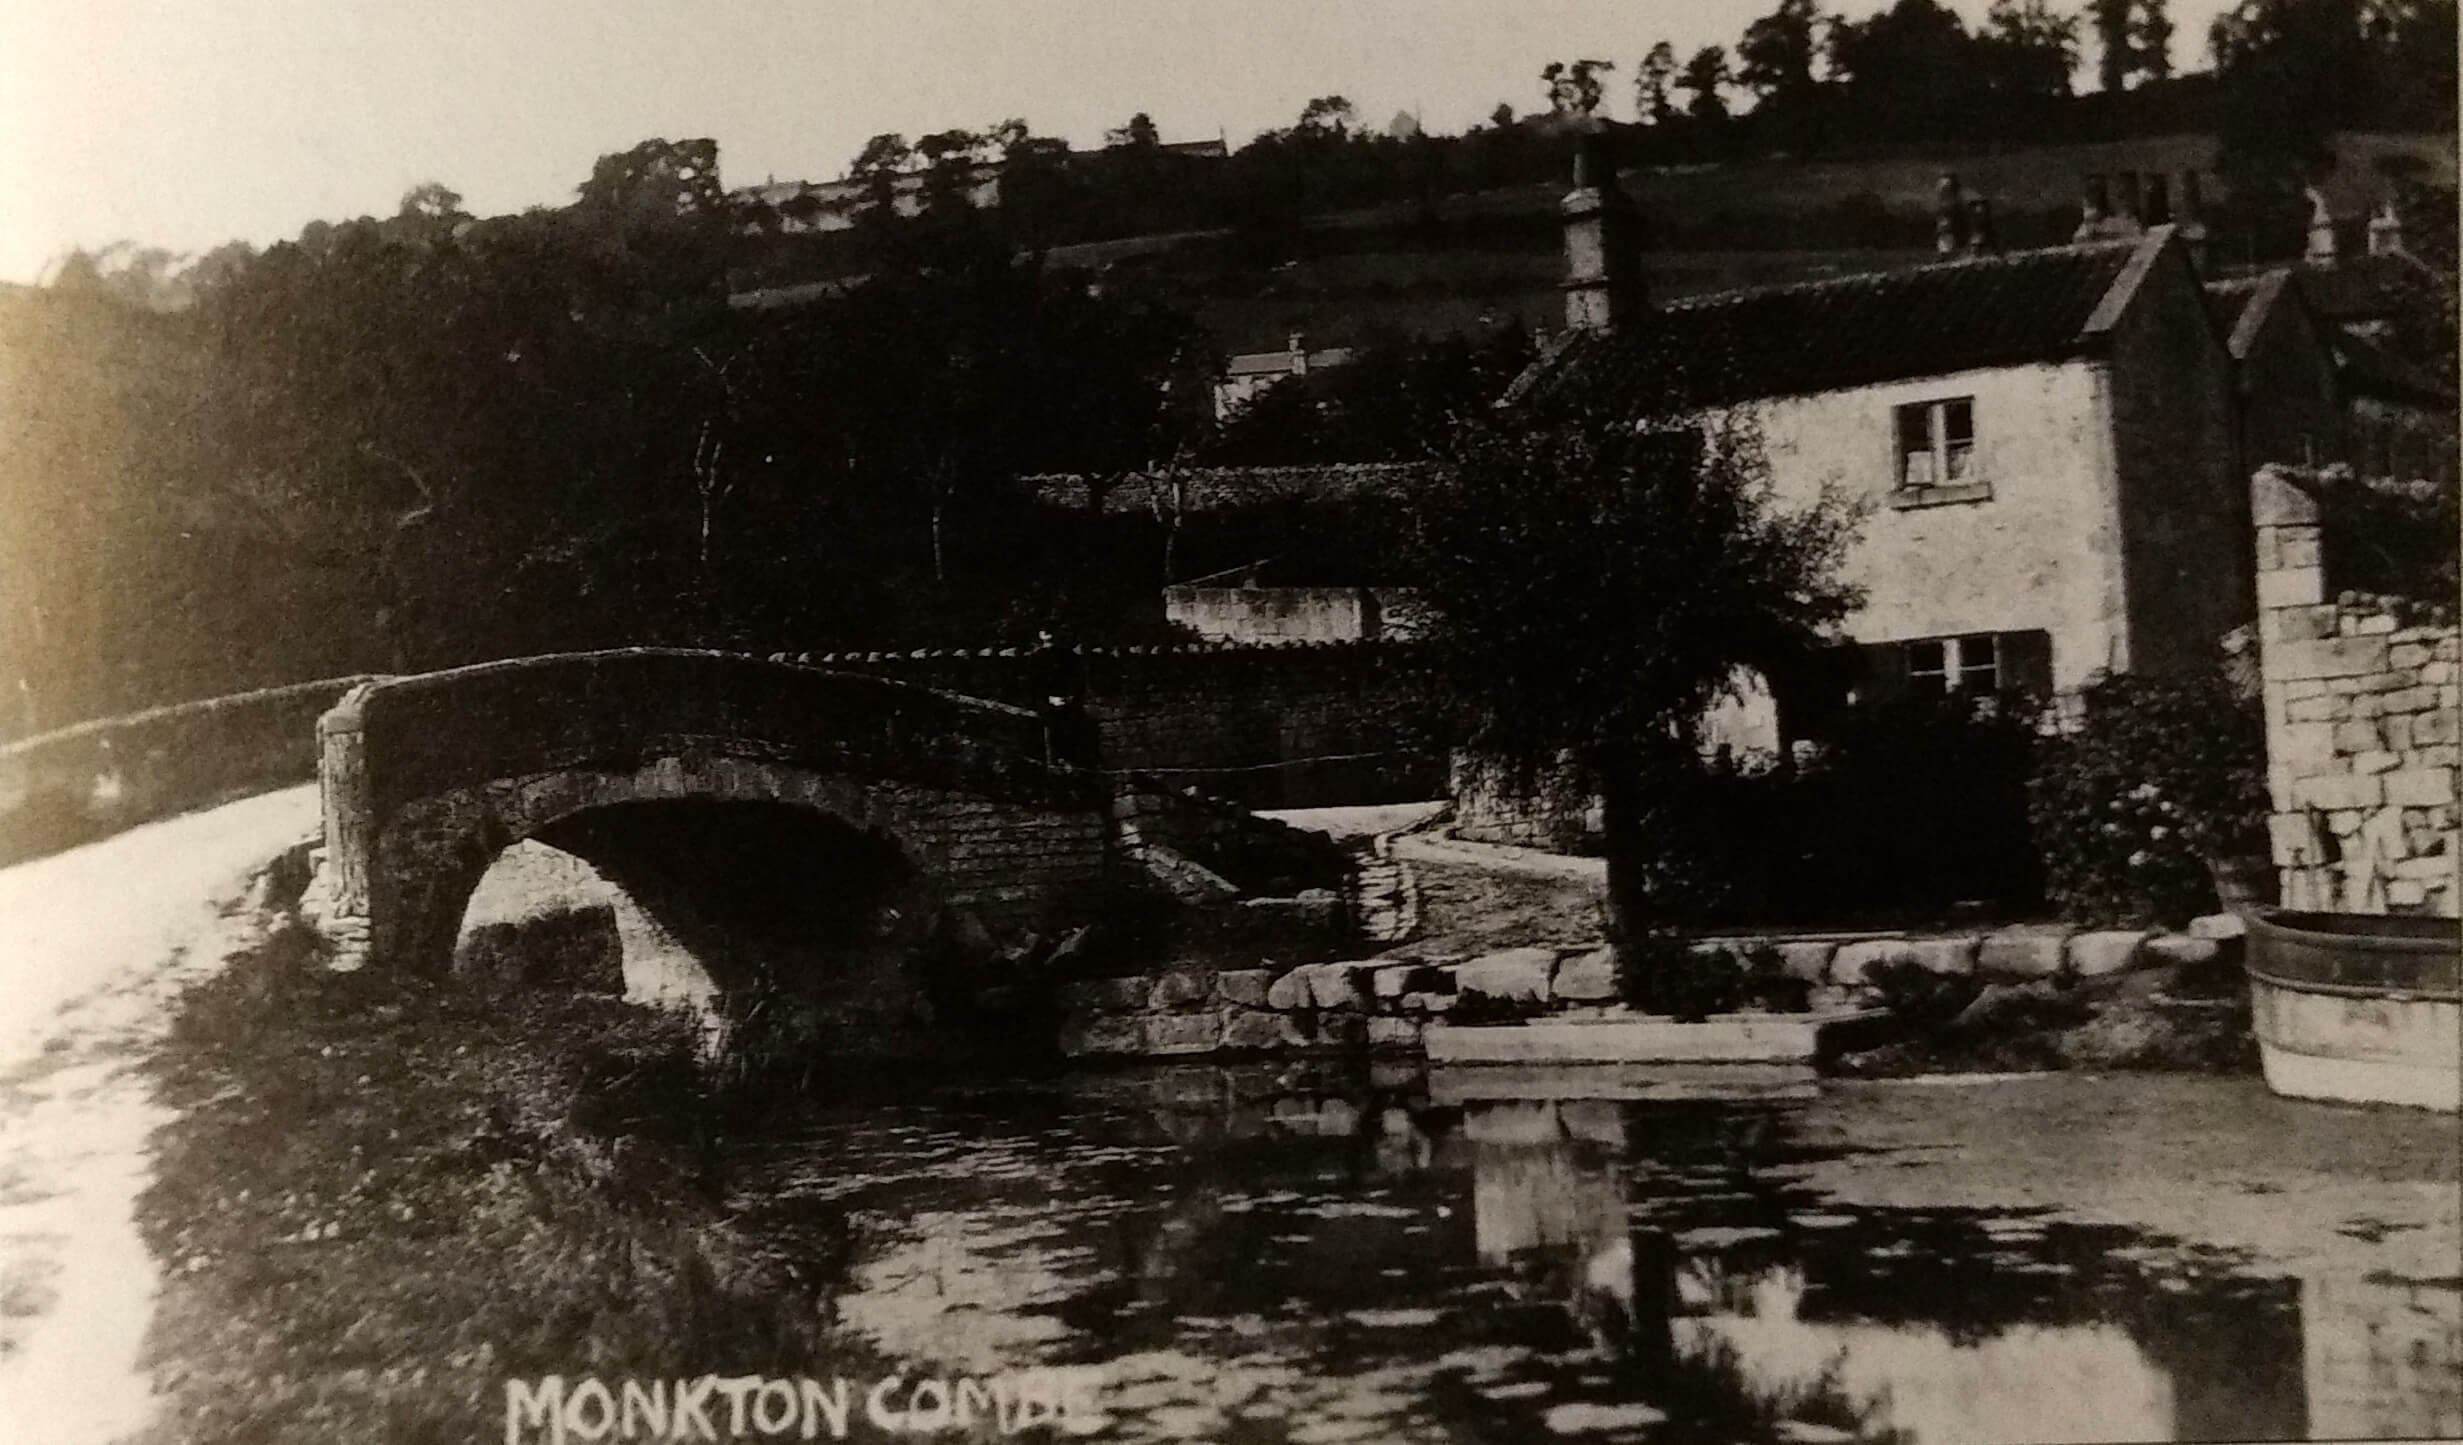 Mill Road, Monkton Combe about 1905